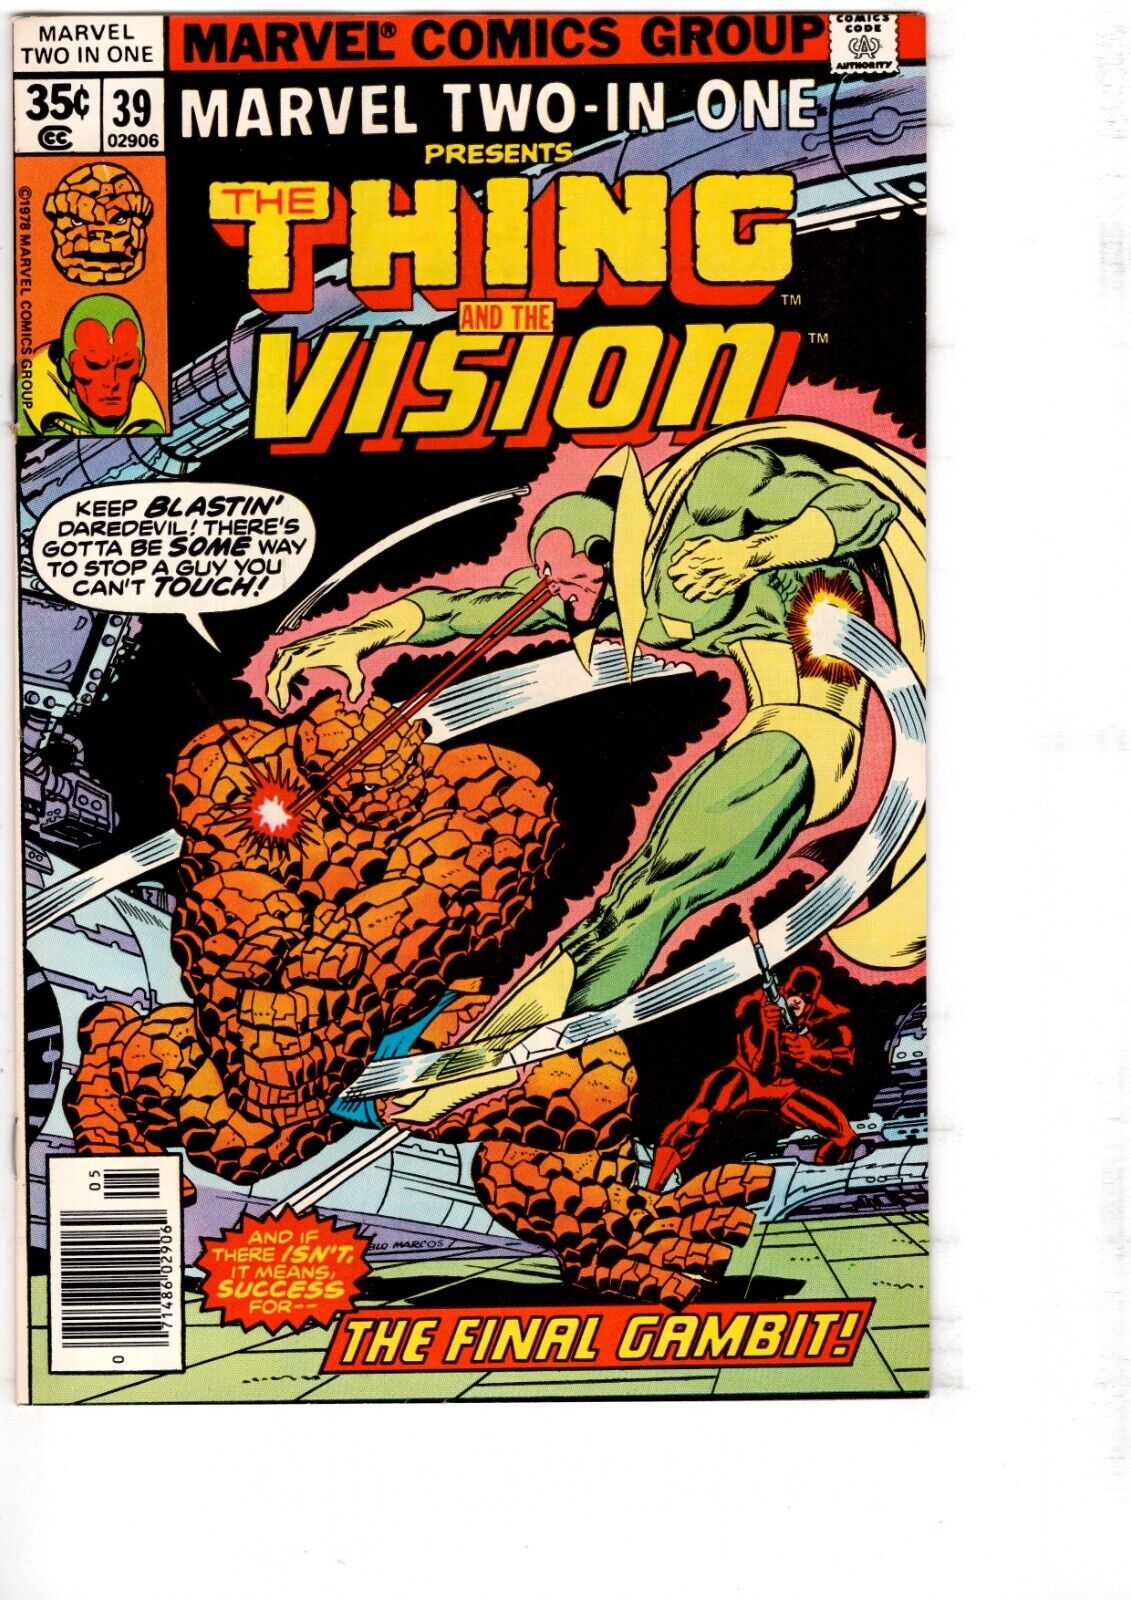 Marvel Two-in-One #39 May 1978